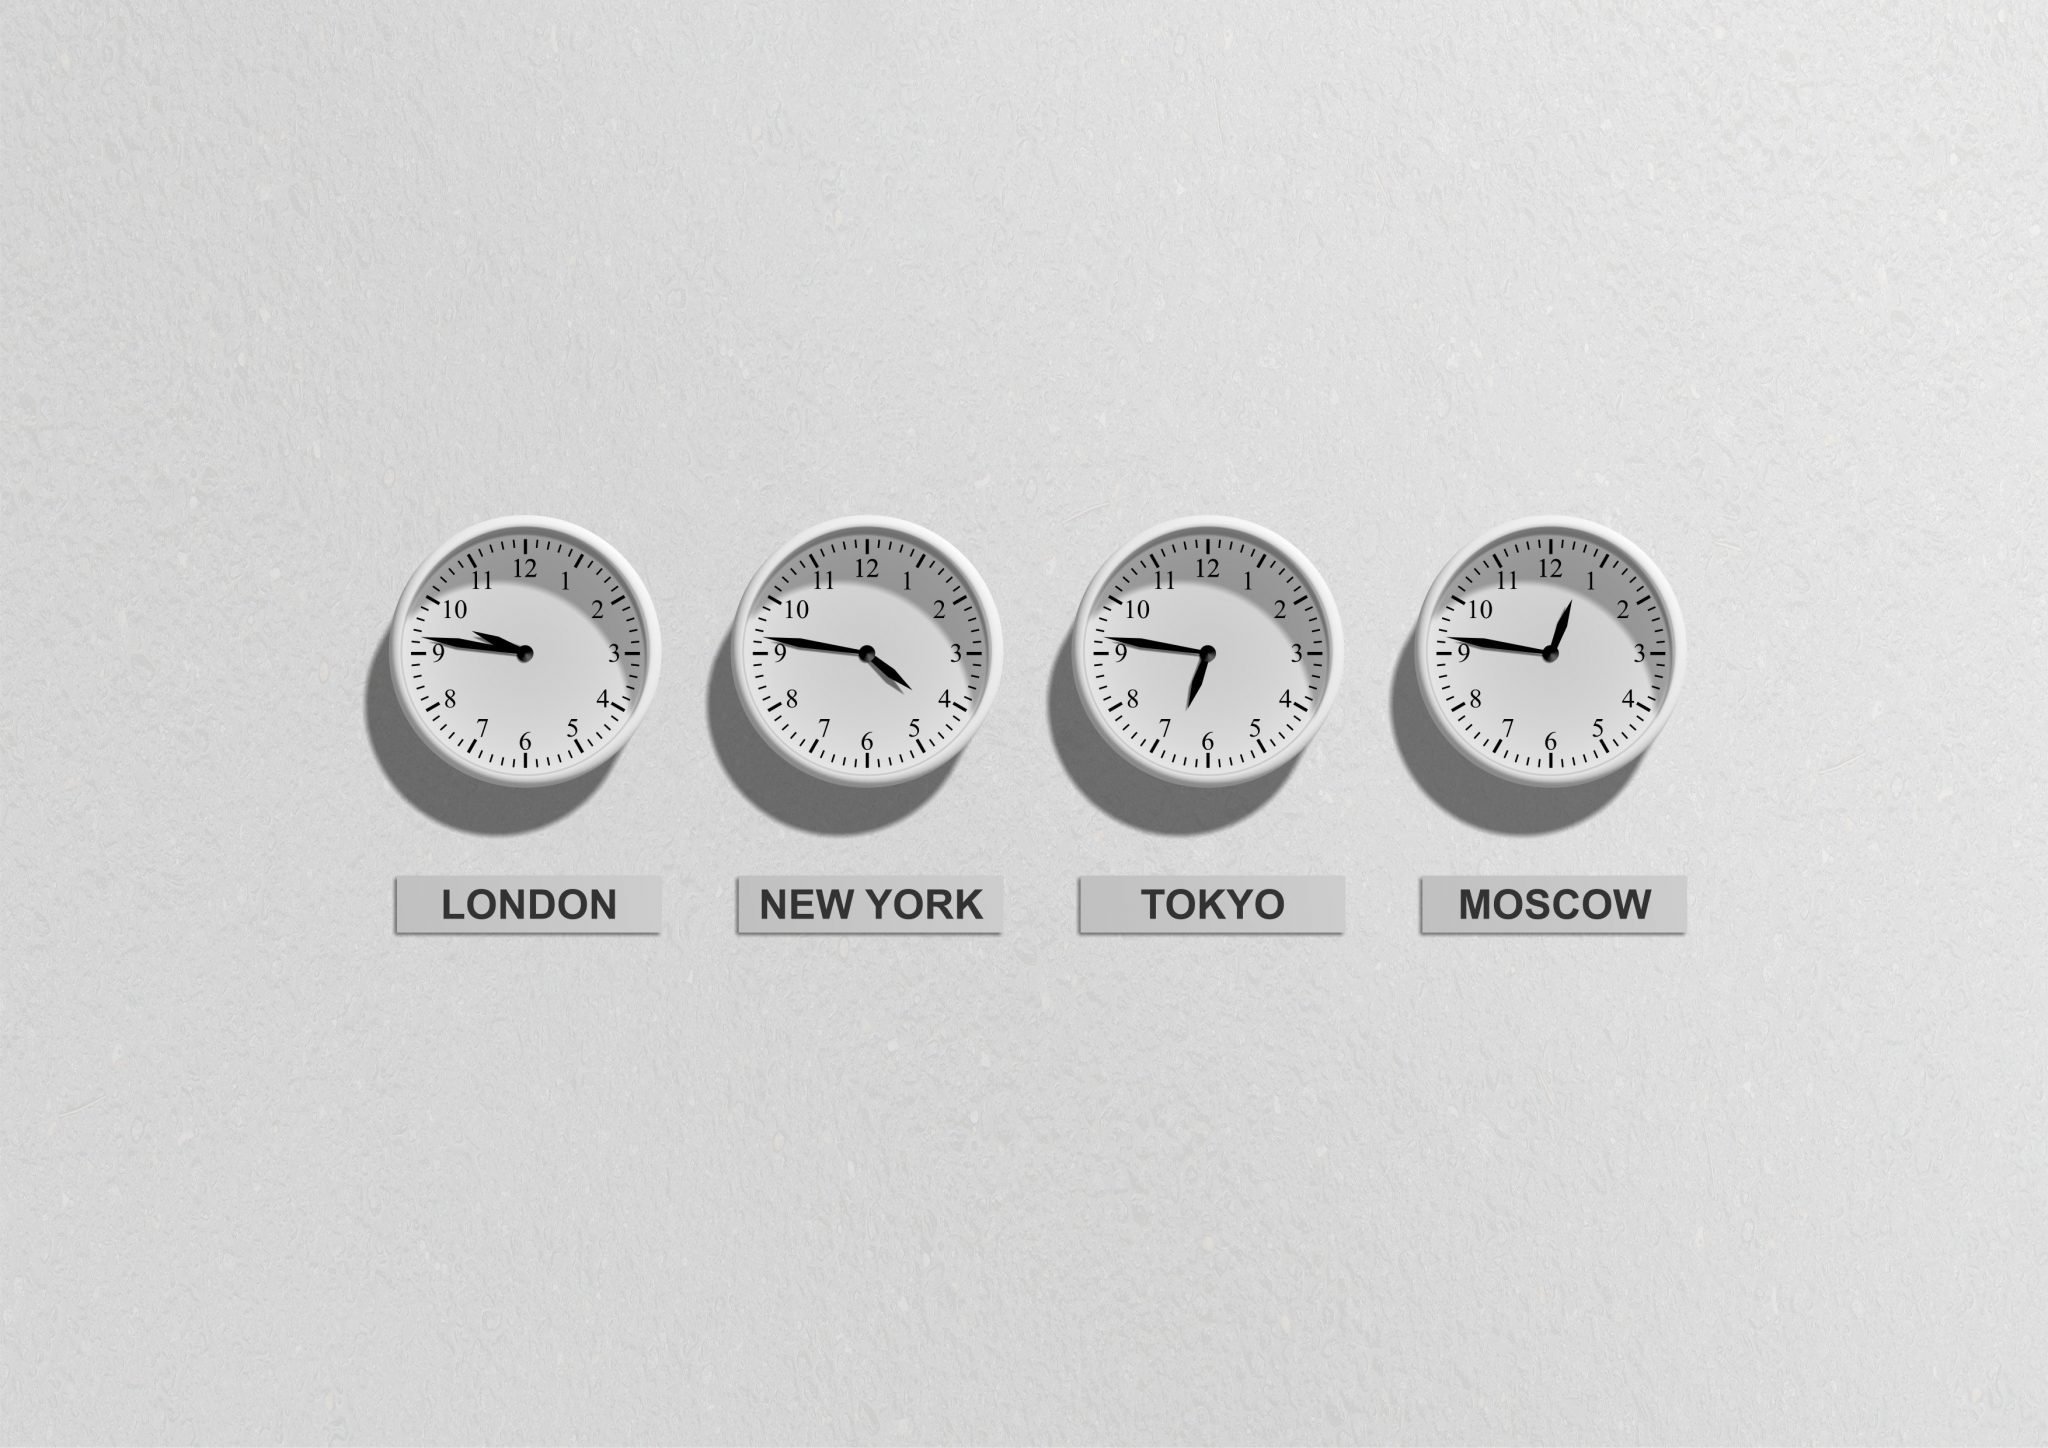 pilot watches and time zones